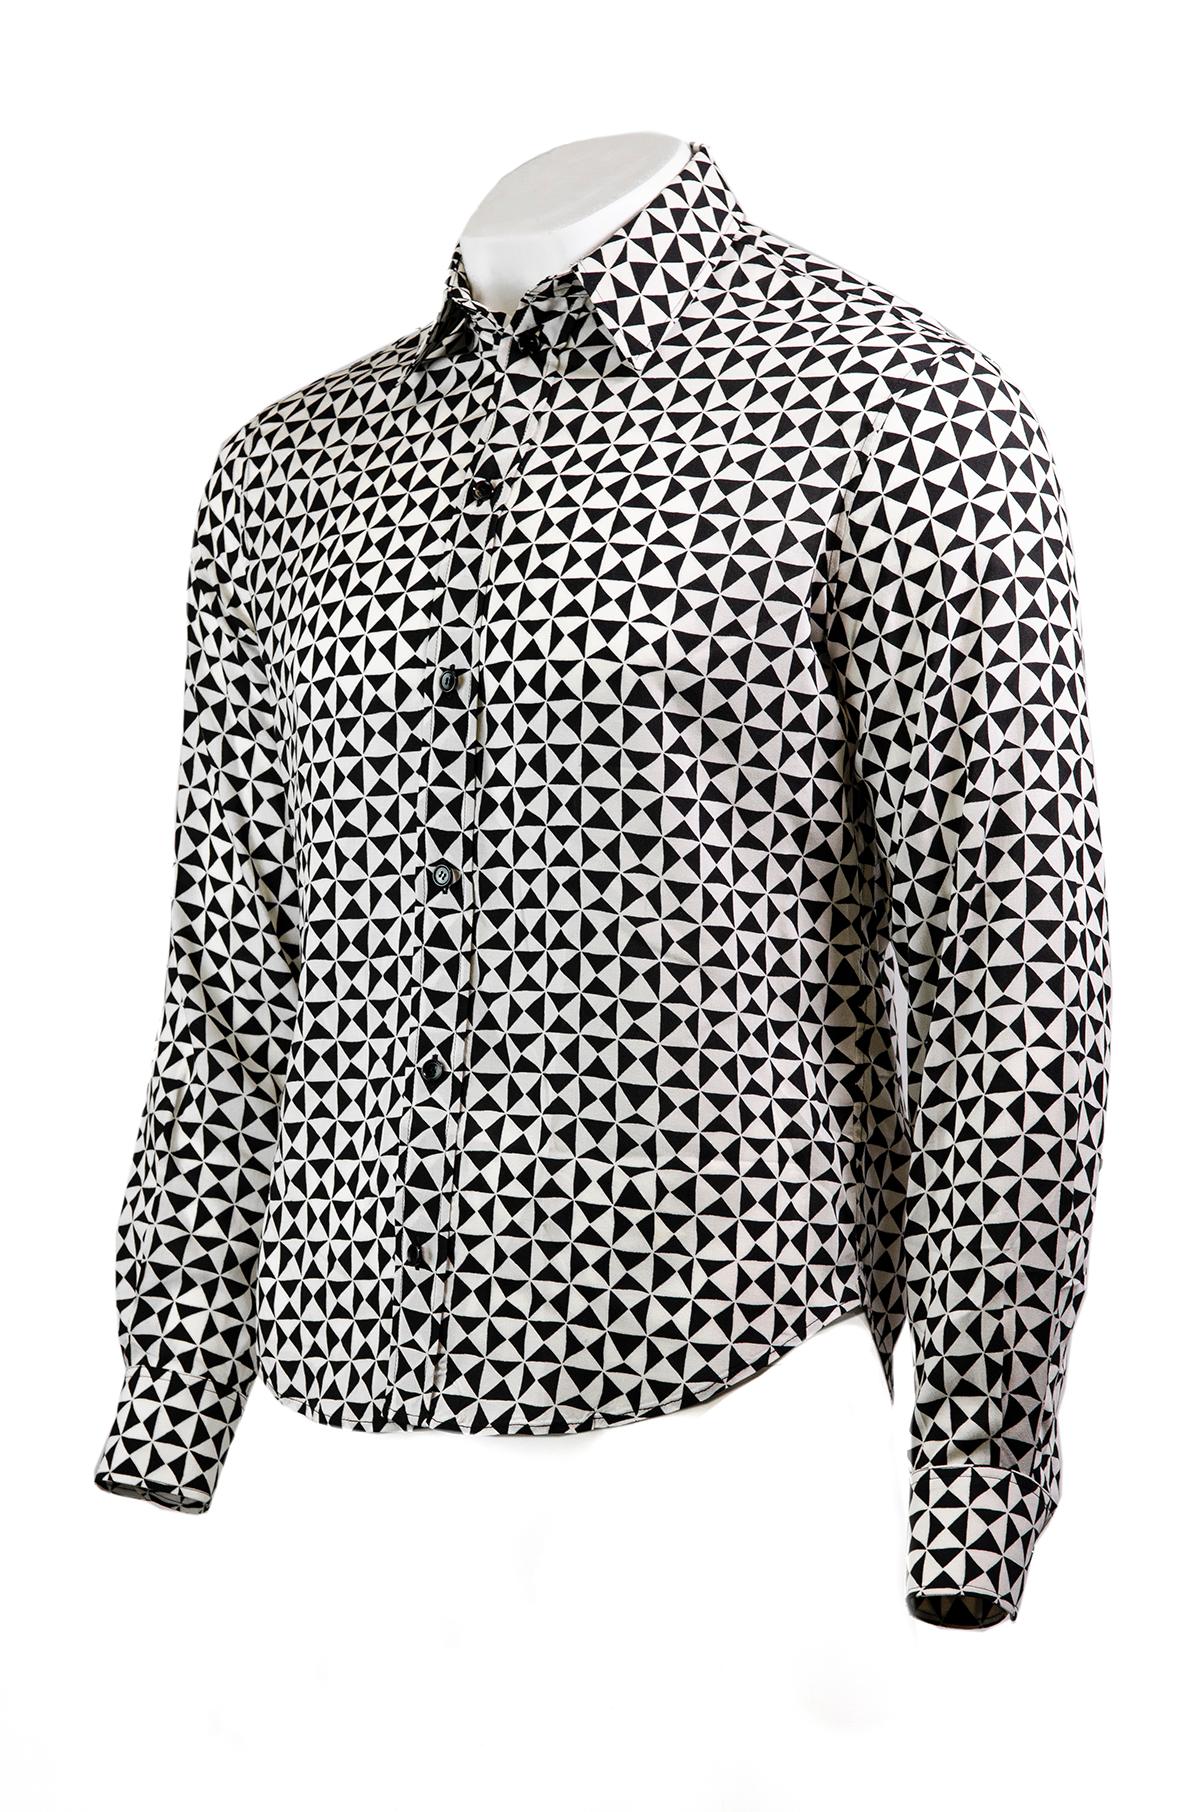 Celine by Heldi Slimane monochrome shirt.

This 70s inspired shirt is made from a soft viscose and features a relaxed fit, black and white triangle pattern, a collared neckline, long cuffed sleeves and a front button closure. So typically Hedi